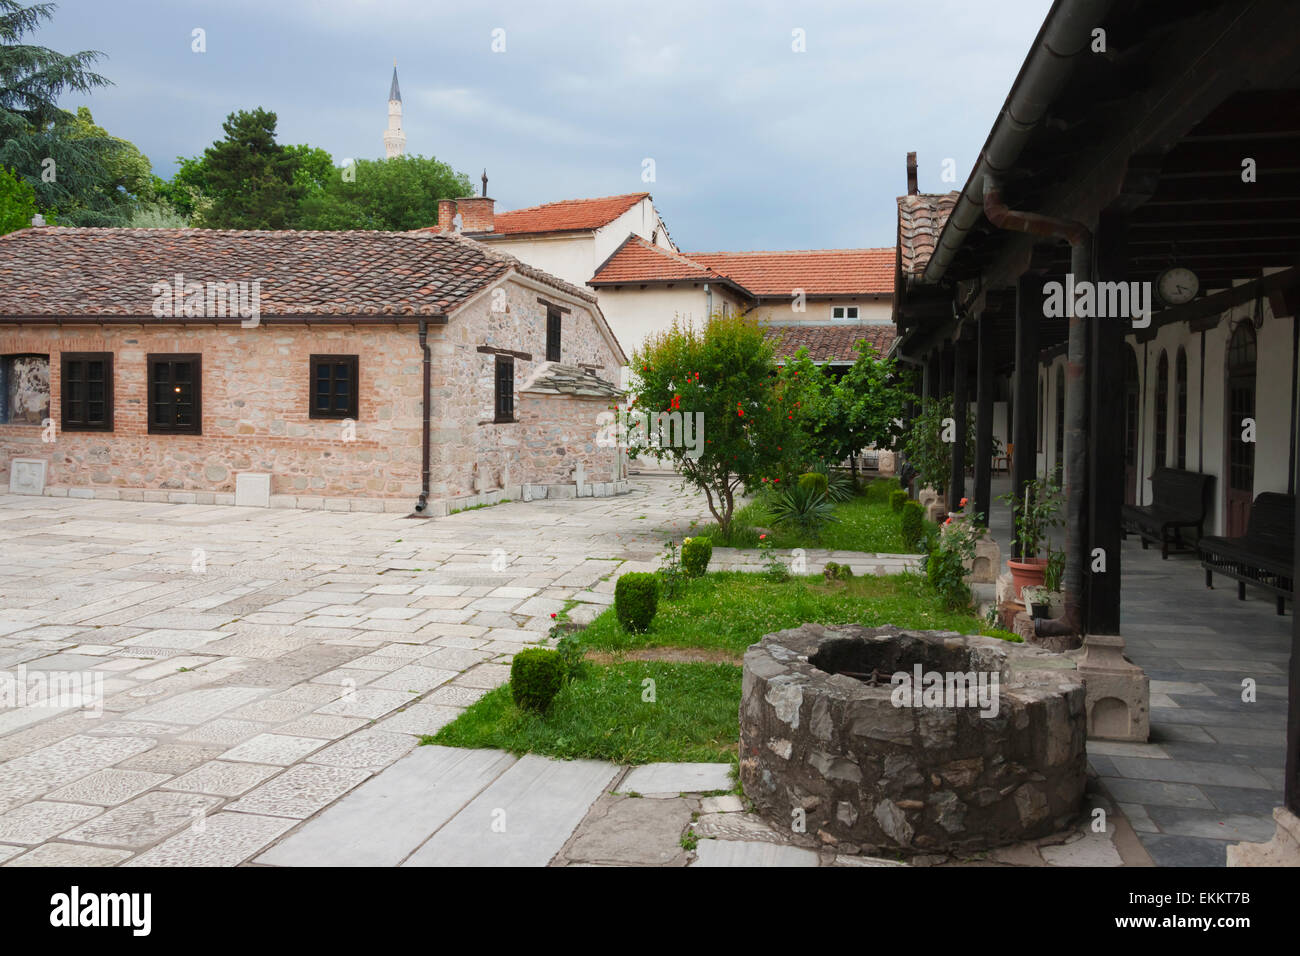 Old day bazaar, now museum housing the Grave for National Heroes, Skopje, Republic of Macedonia, Europe Stock Photo